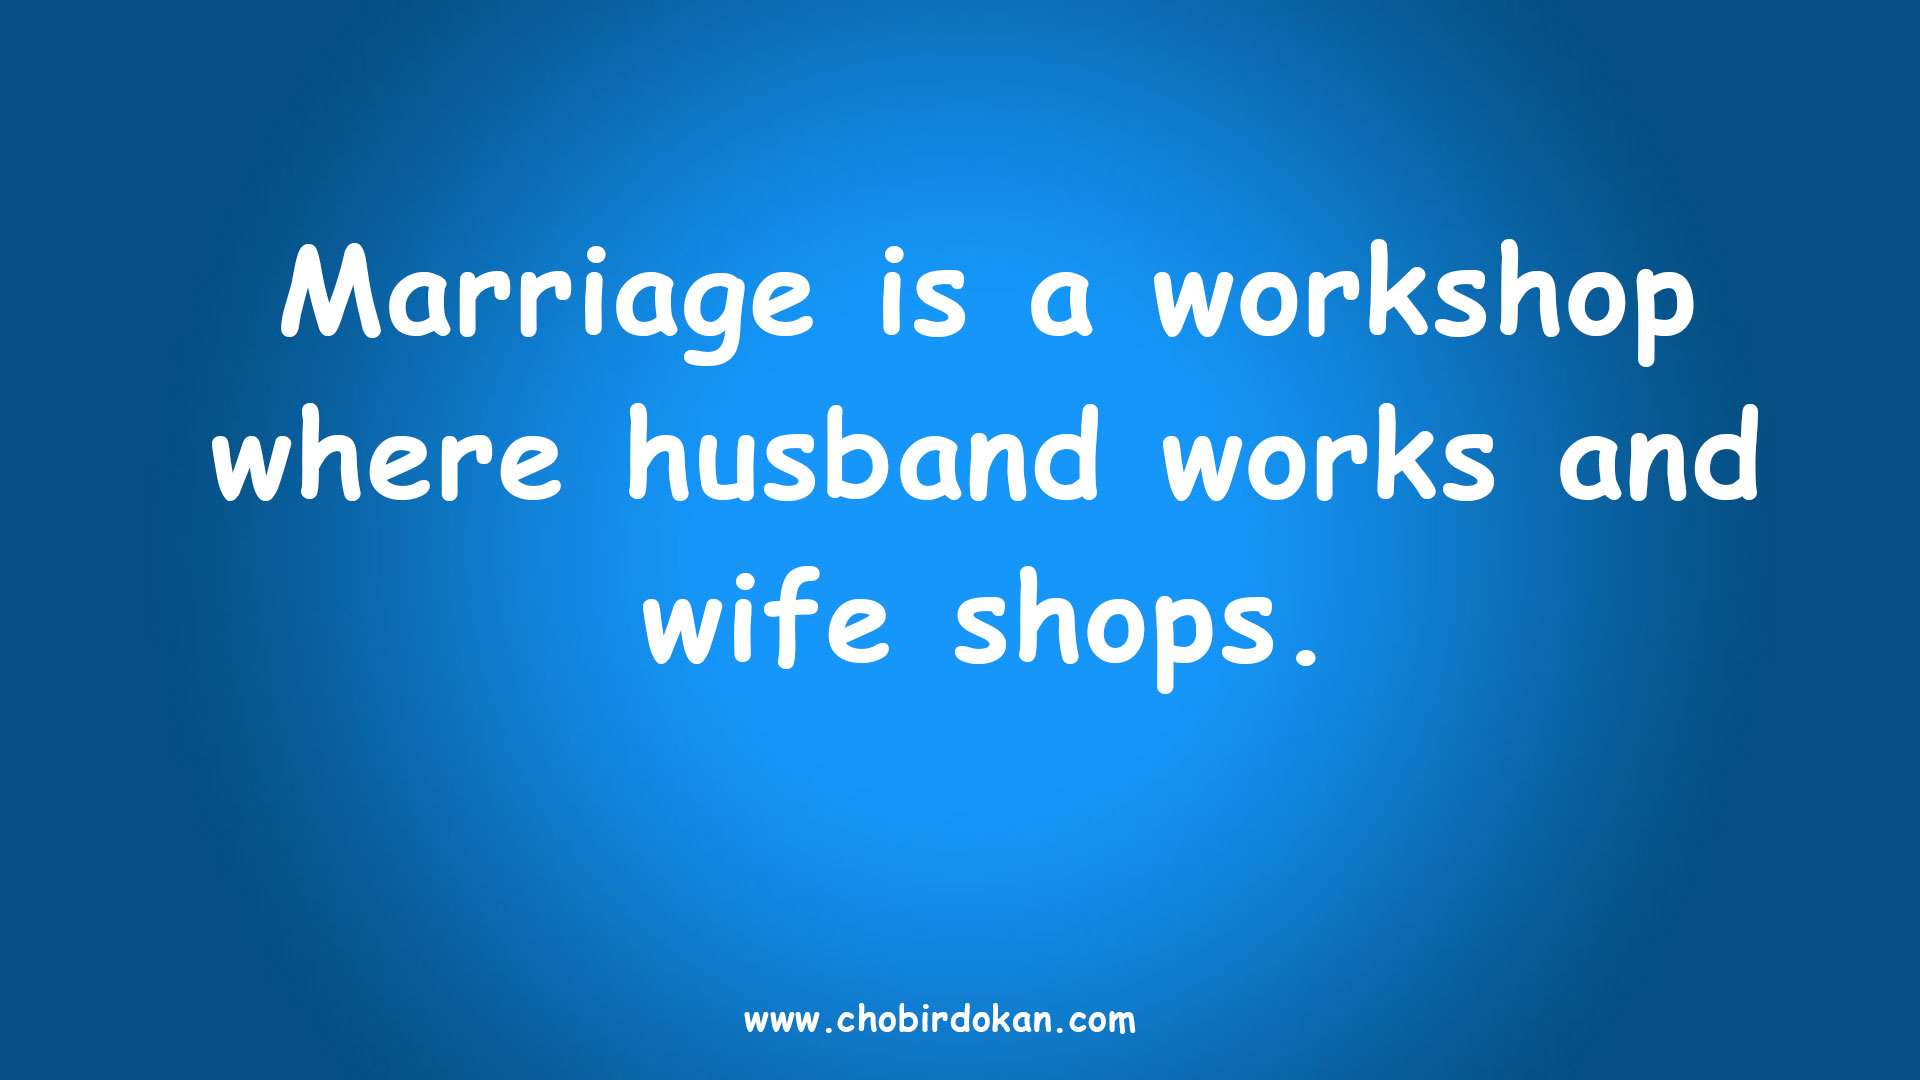 Funny Marriage Quotes Images -Funny Wedding Sayings